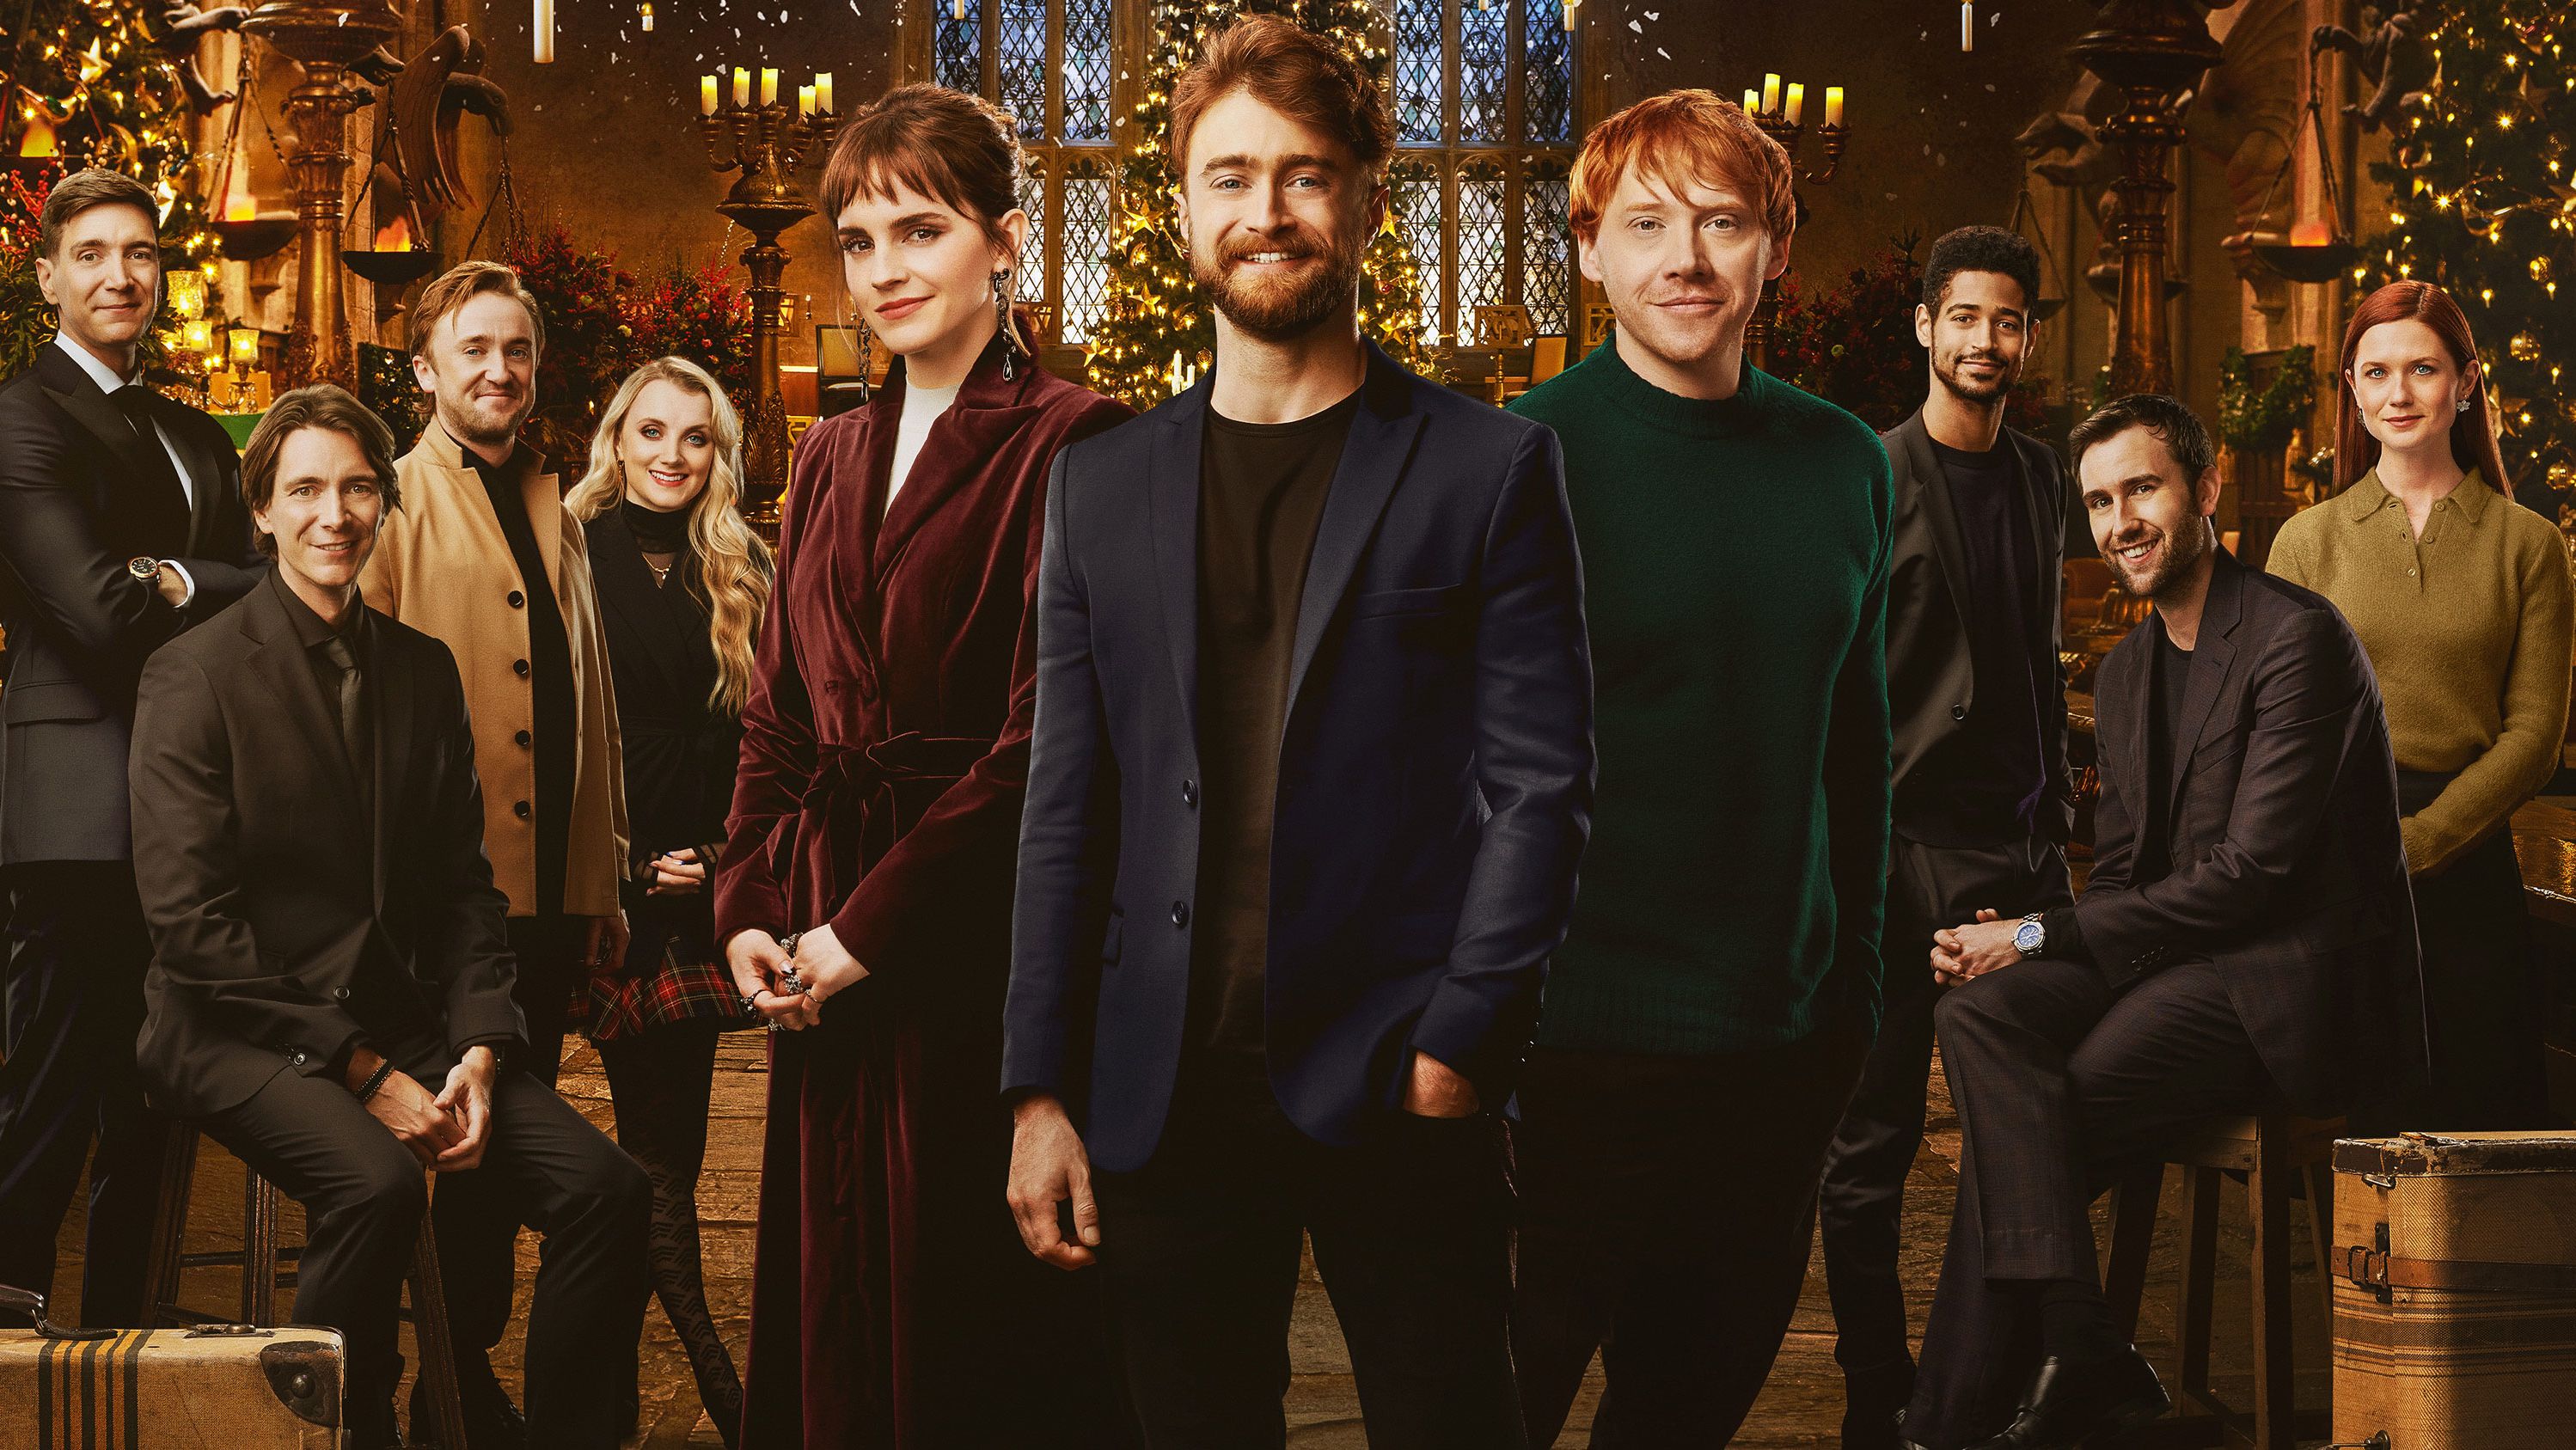  Emma Watson, Daniel Radcliffe and Rupert Grint (center foreground) in the HBO Max special 'Harry Potter 20th Anniversary: Return to Hogwarts.'